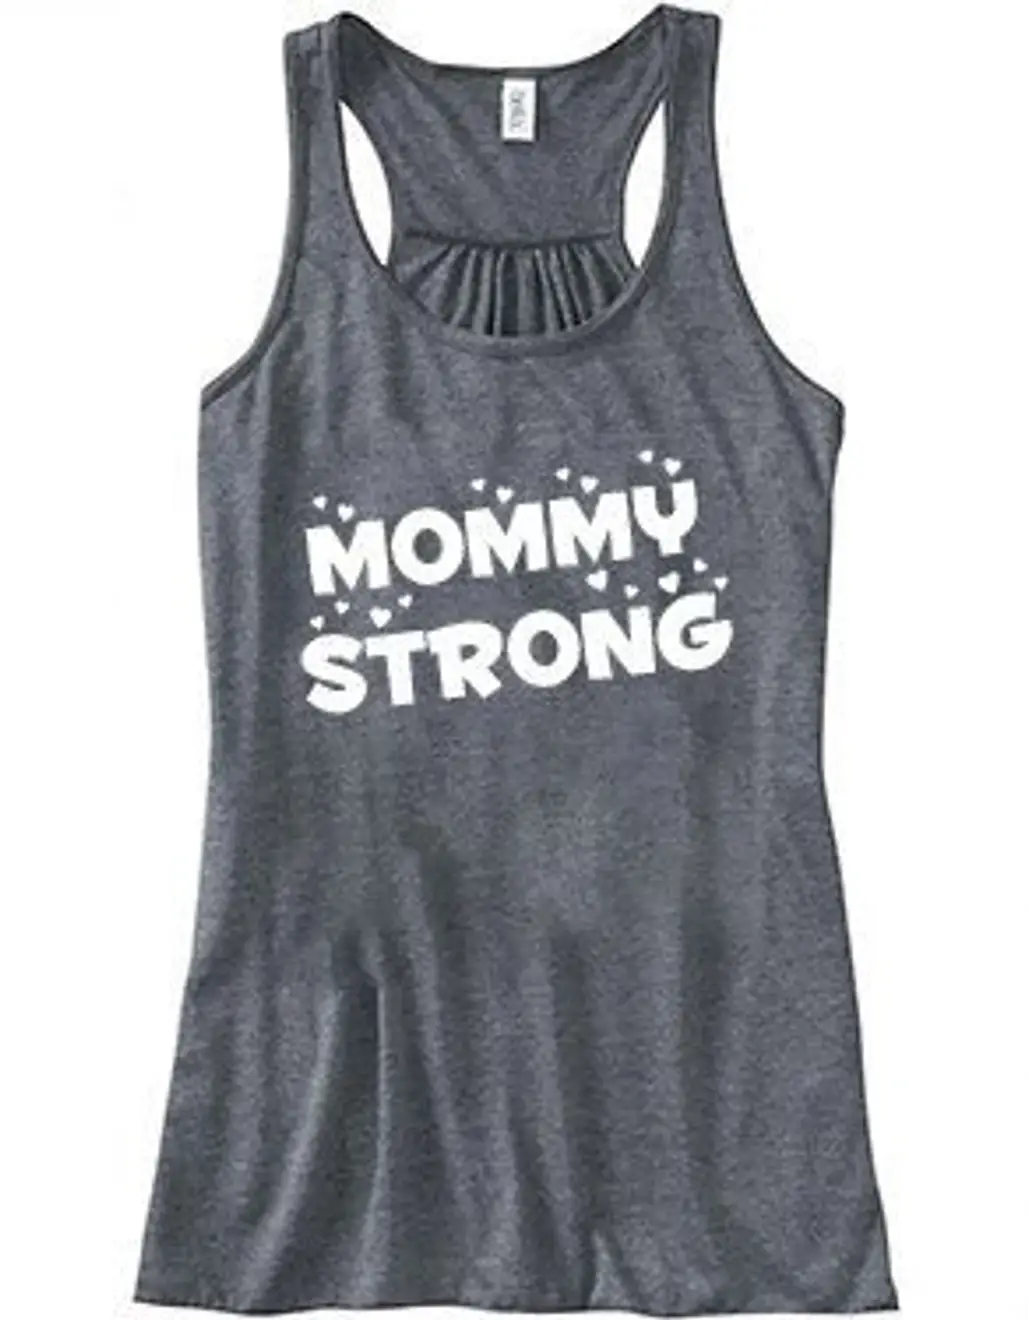 Mommy Strong!